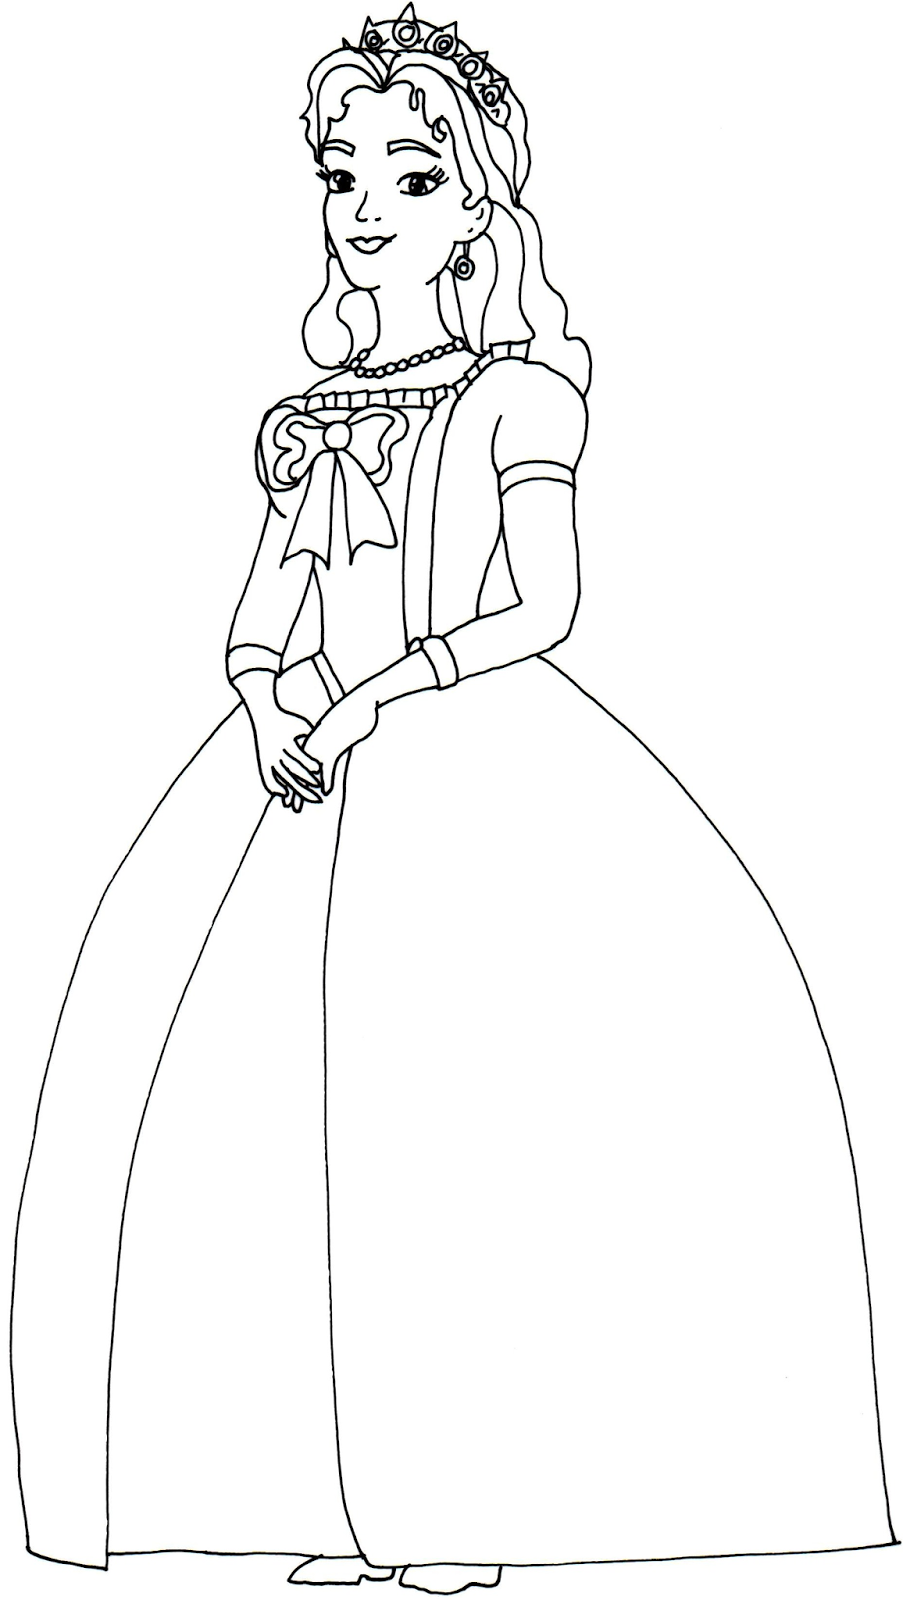 Sofia with the tiara of princess coloring page | princess party ...